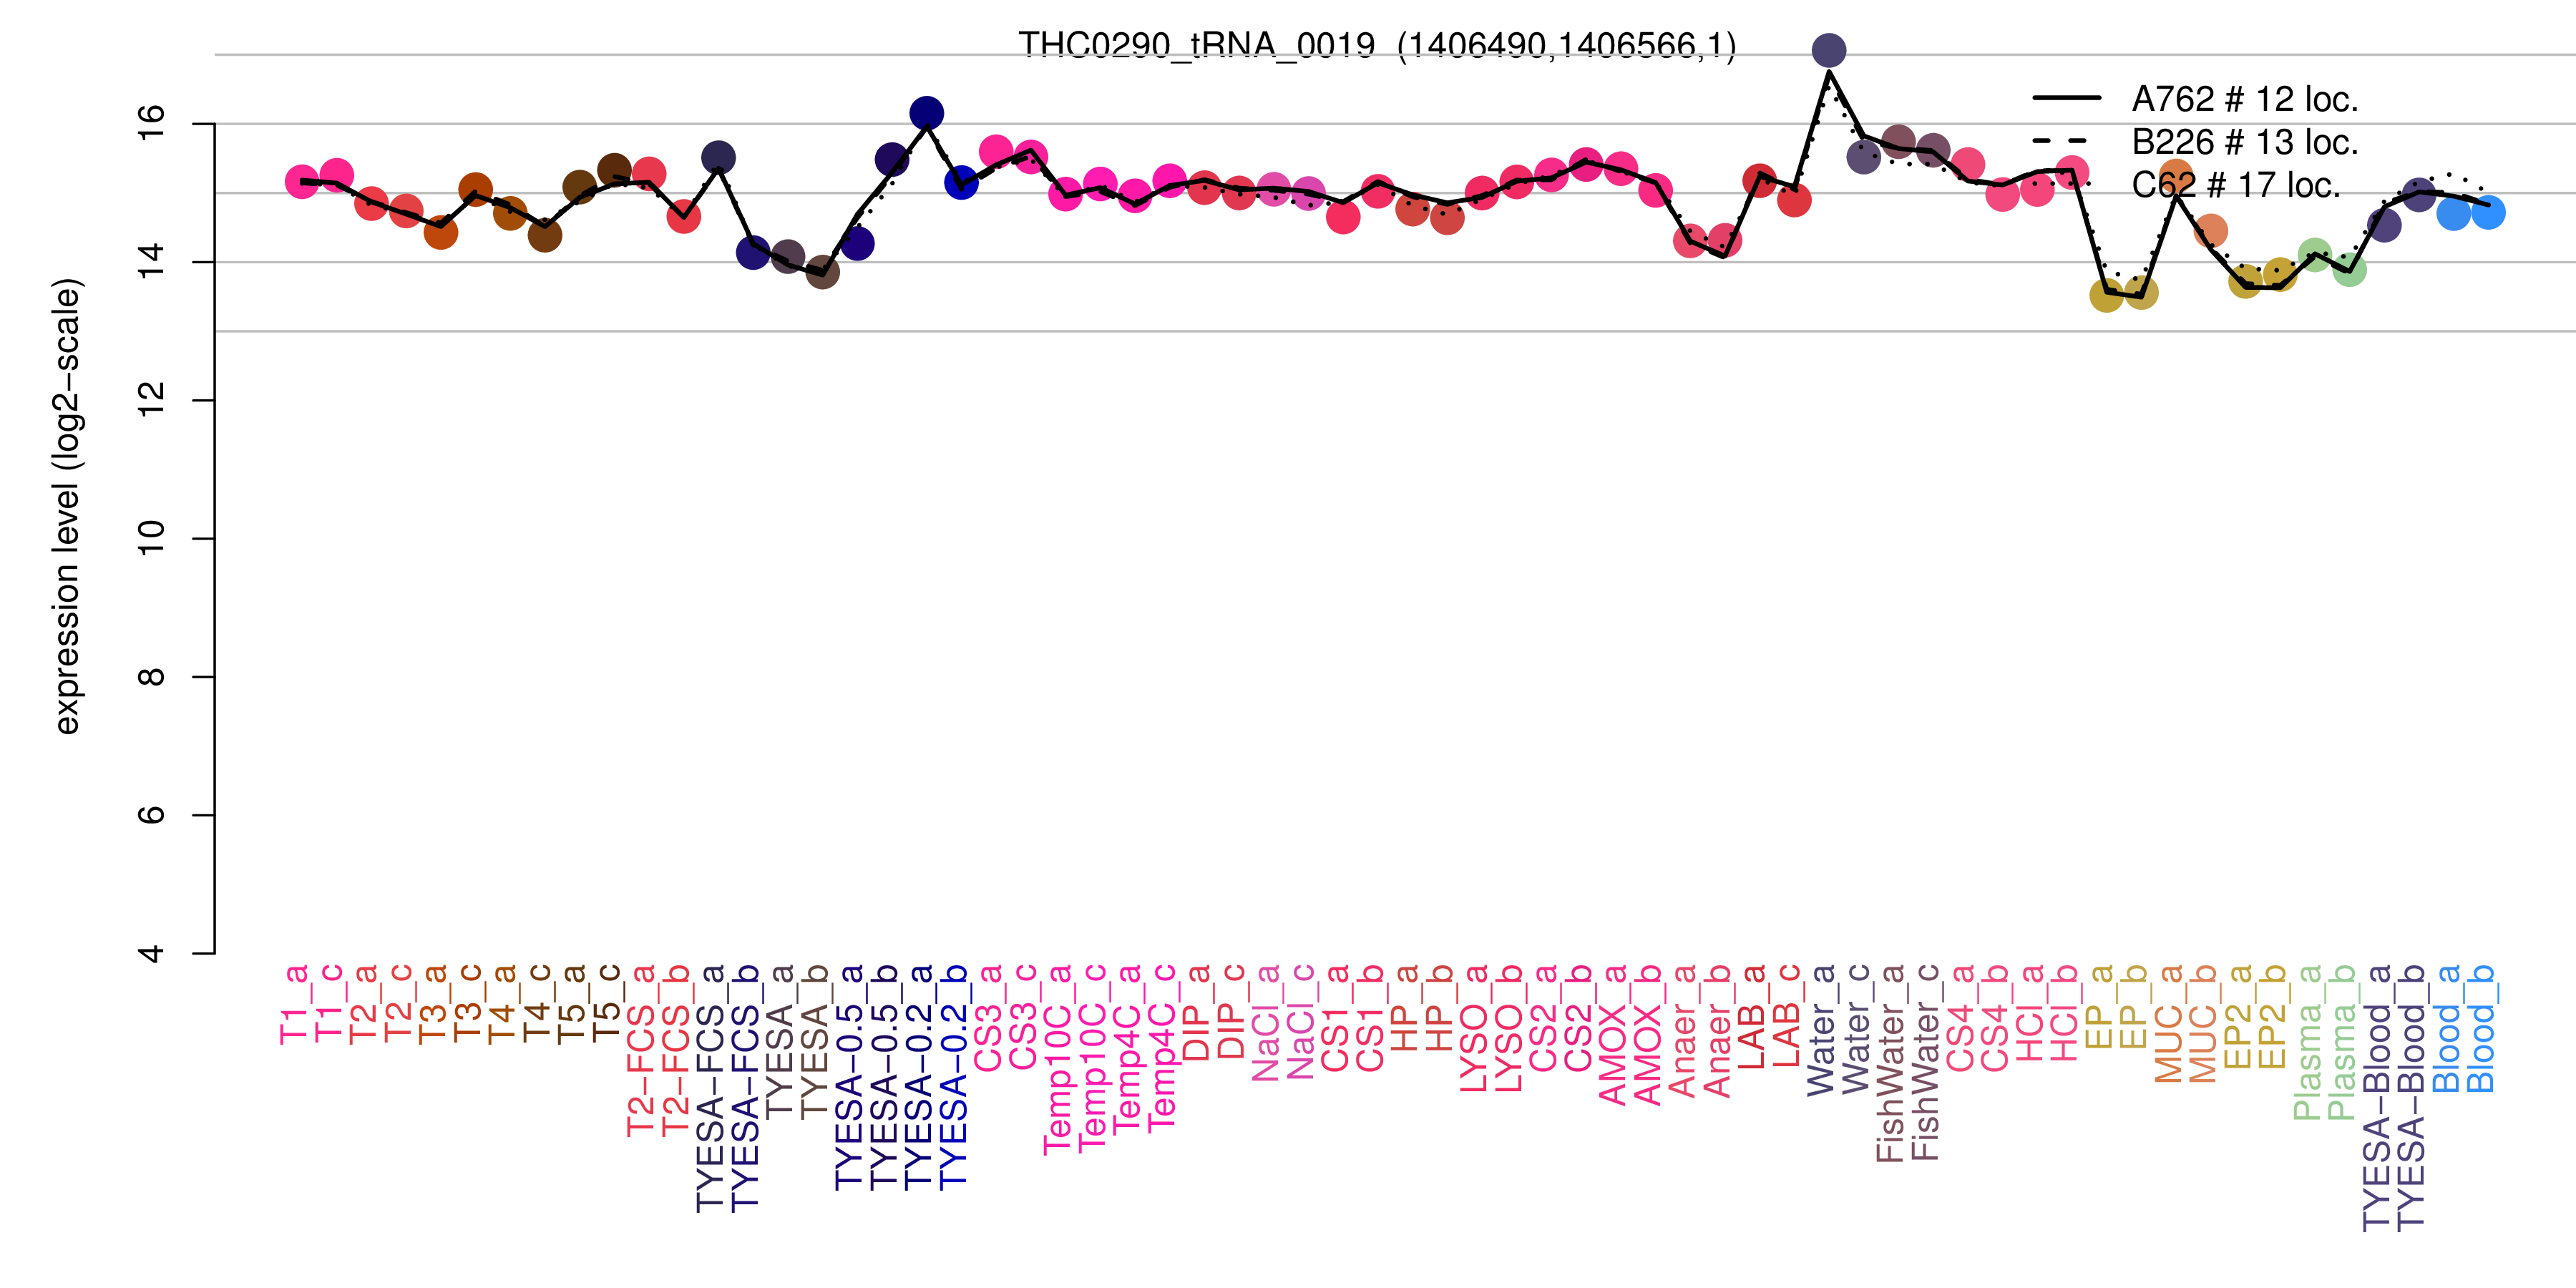 THC0290_tRNA_0019 expression levels among conditions